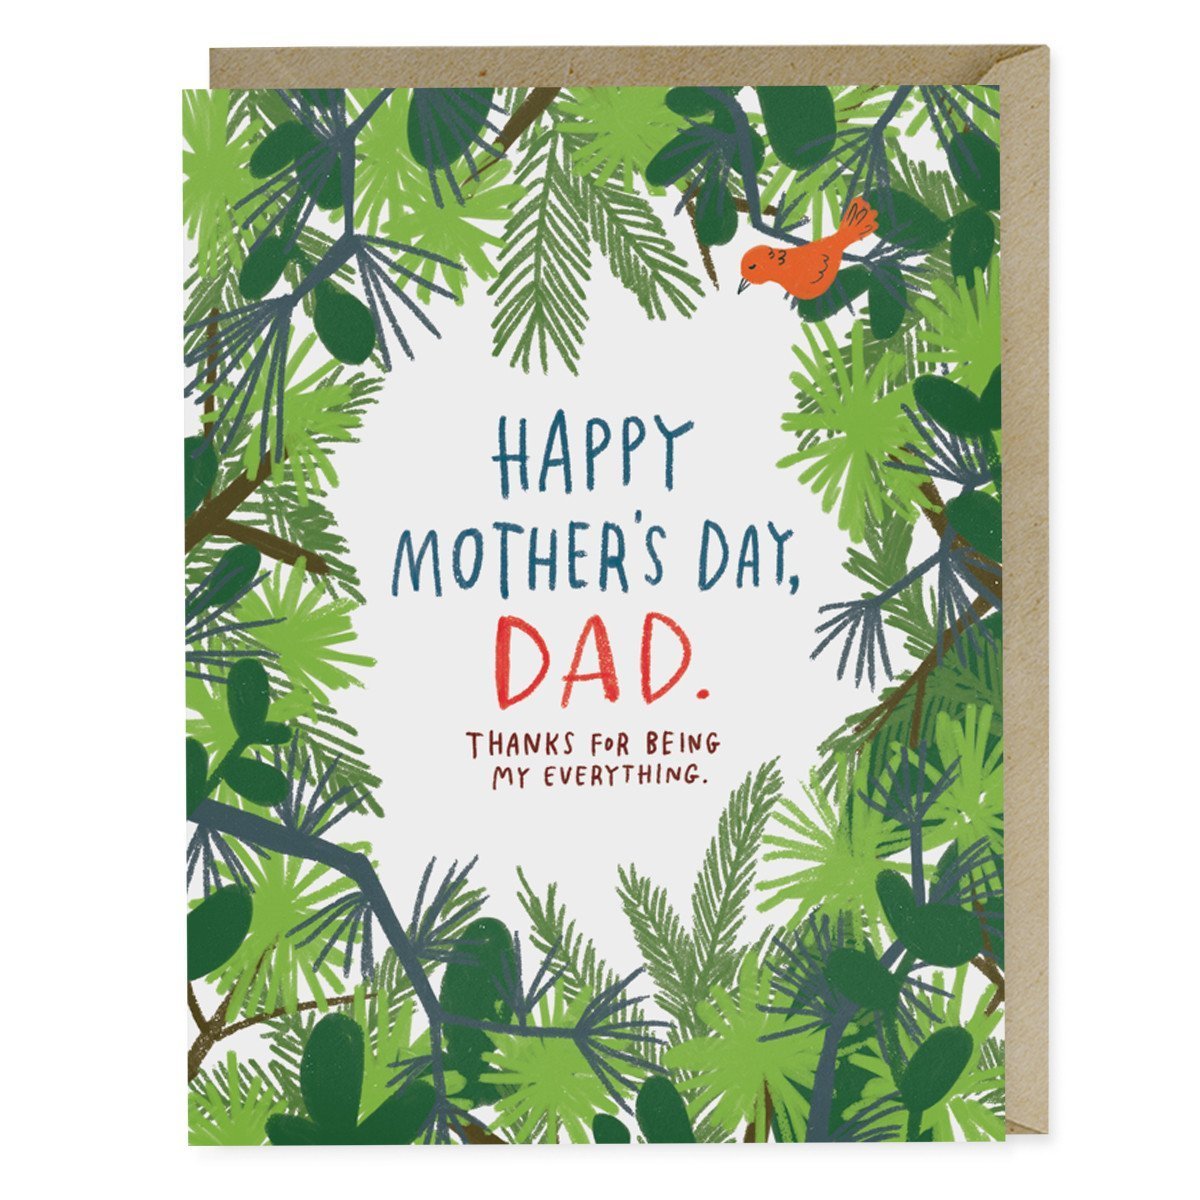 Happy Mothers Day, Dad. - Greeting Card